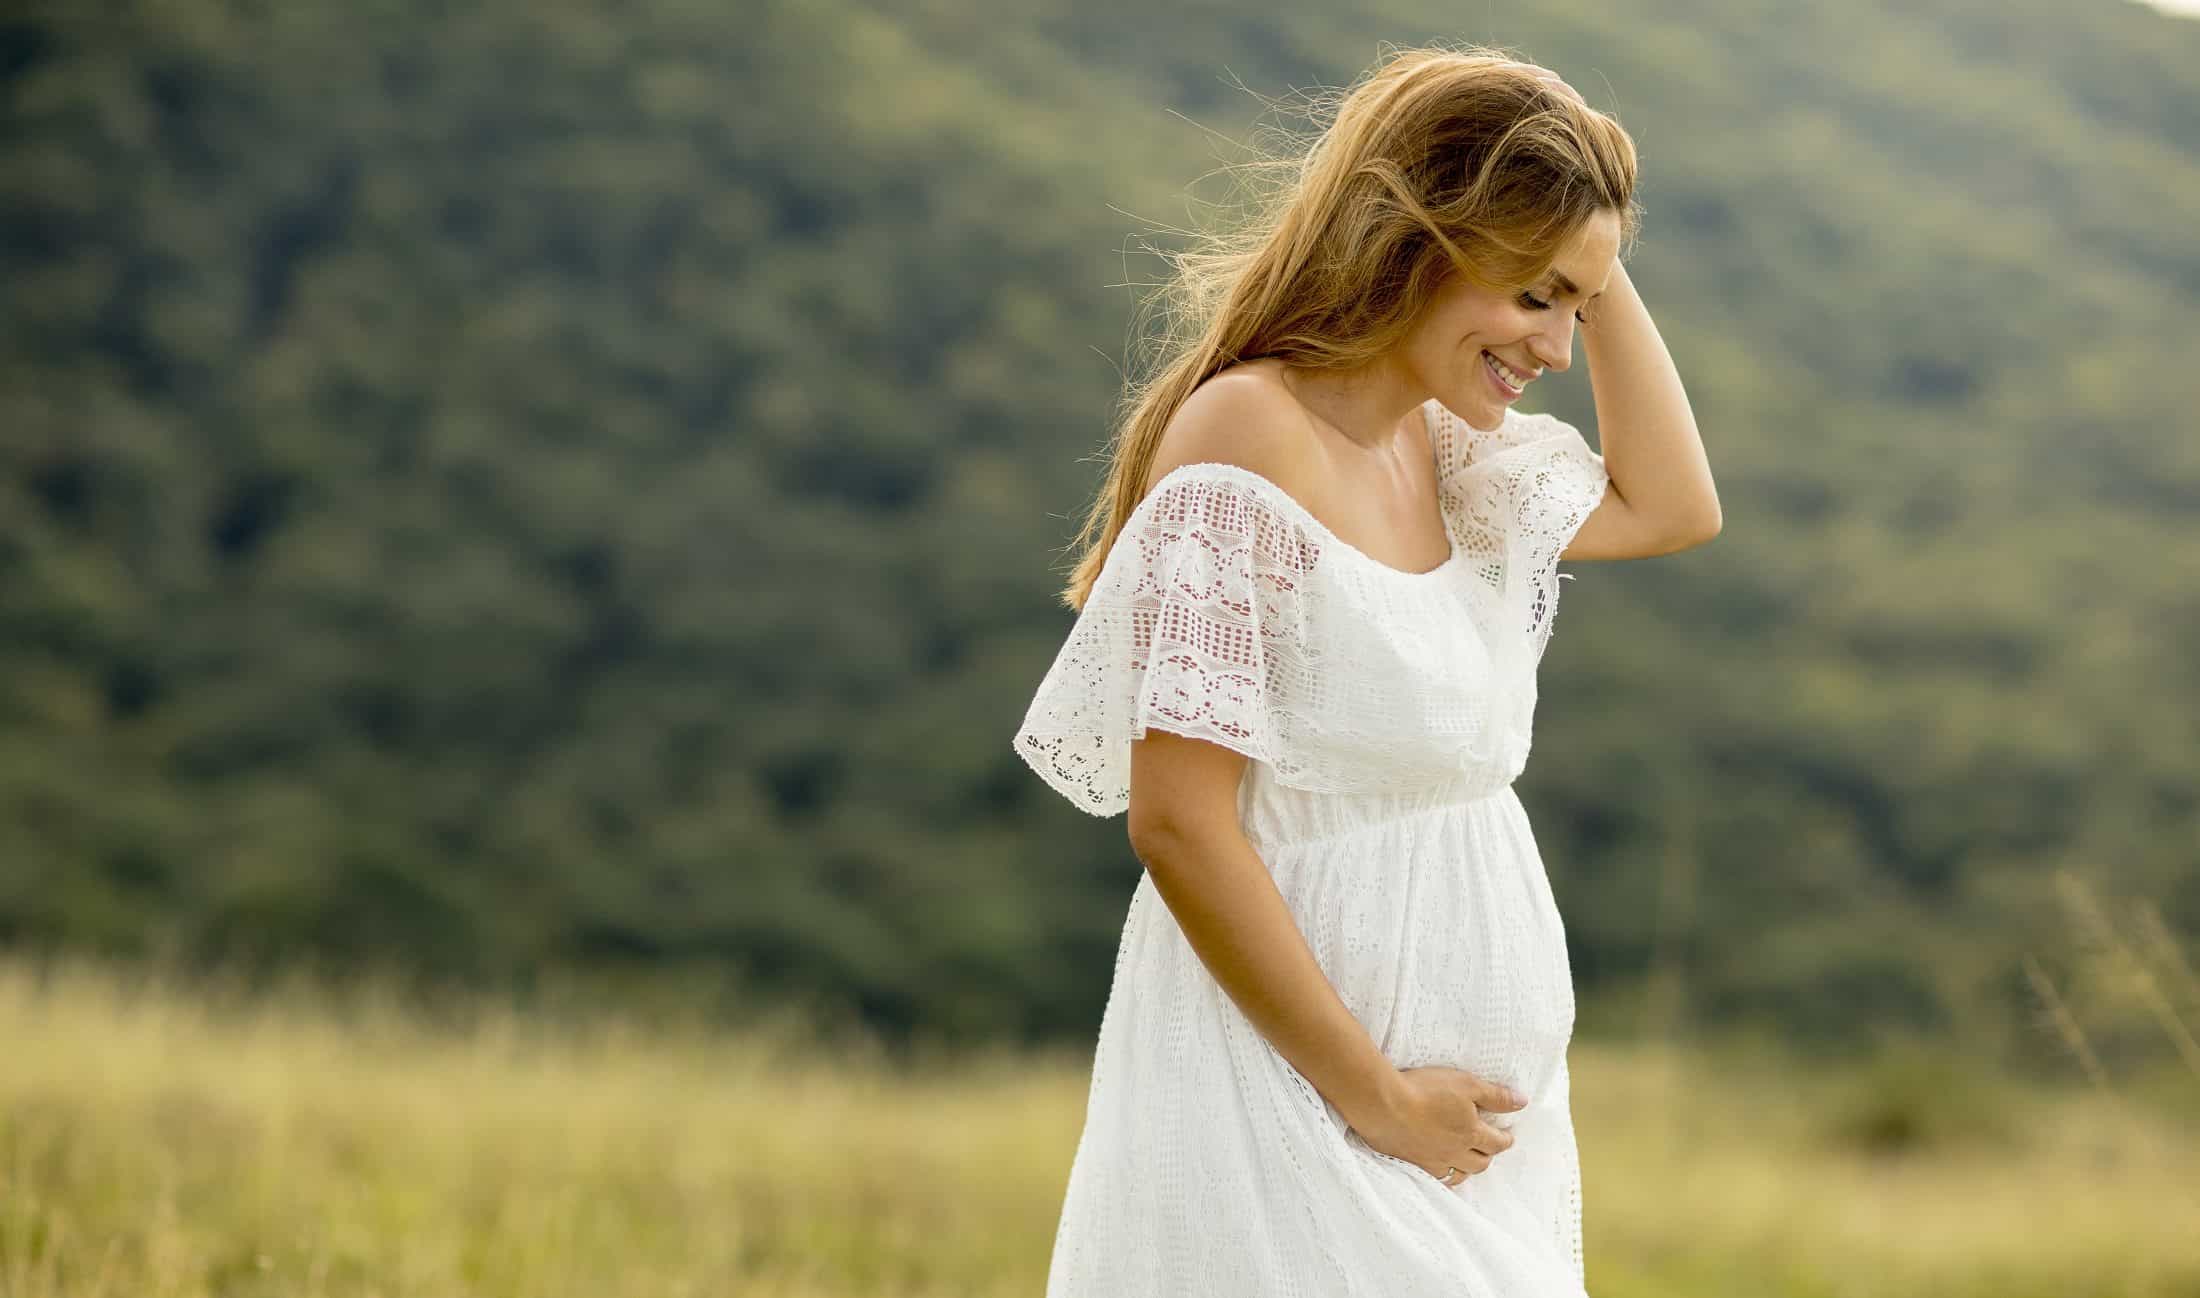 How to deal with the heat while pregnant?